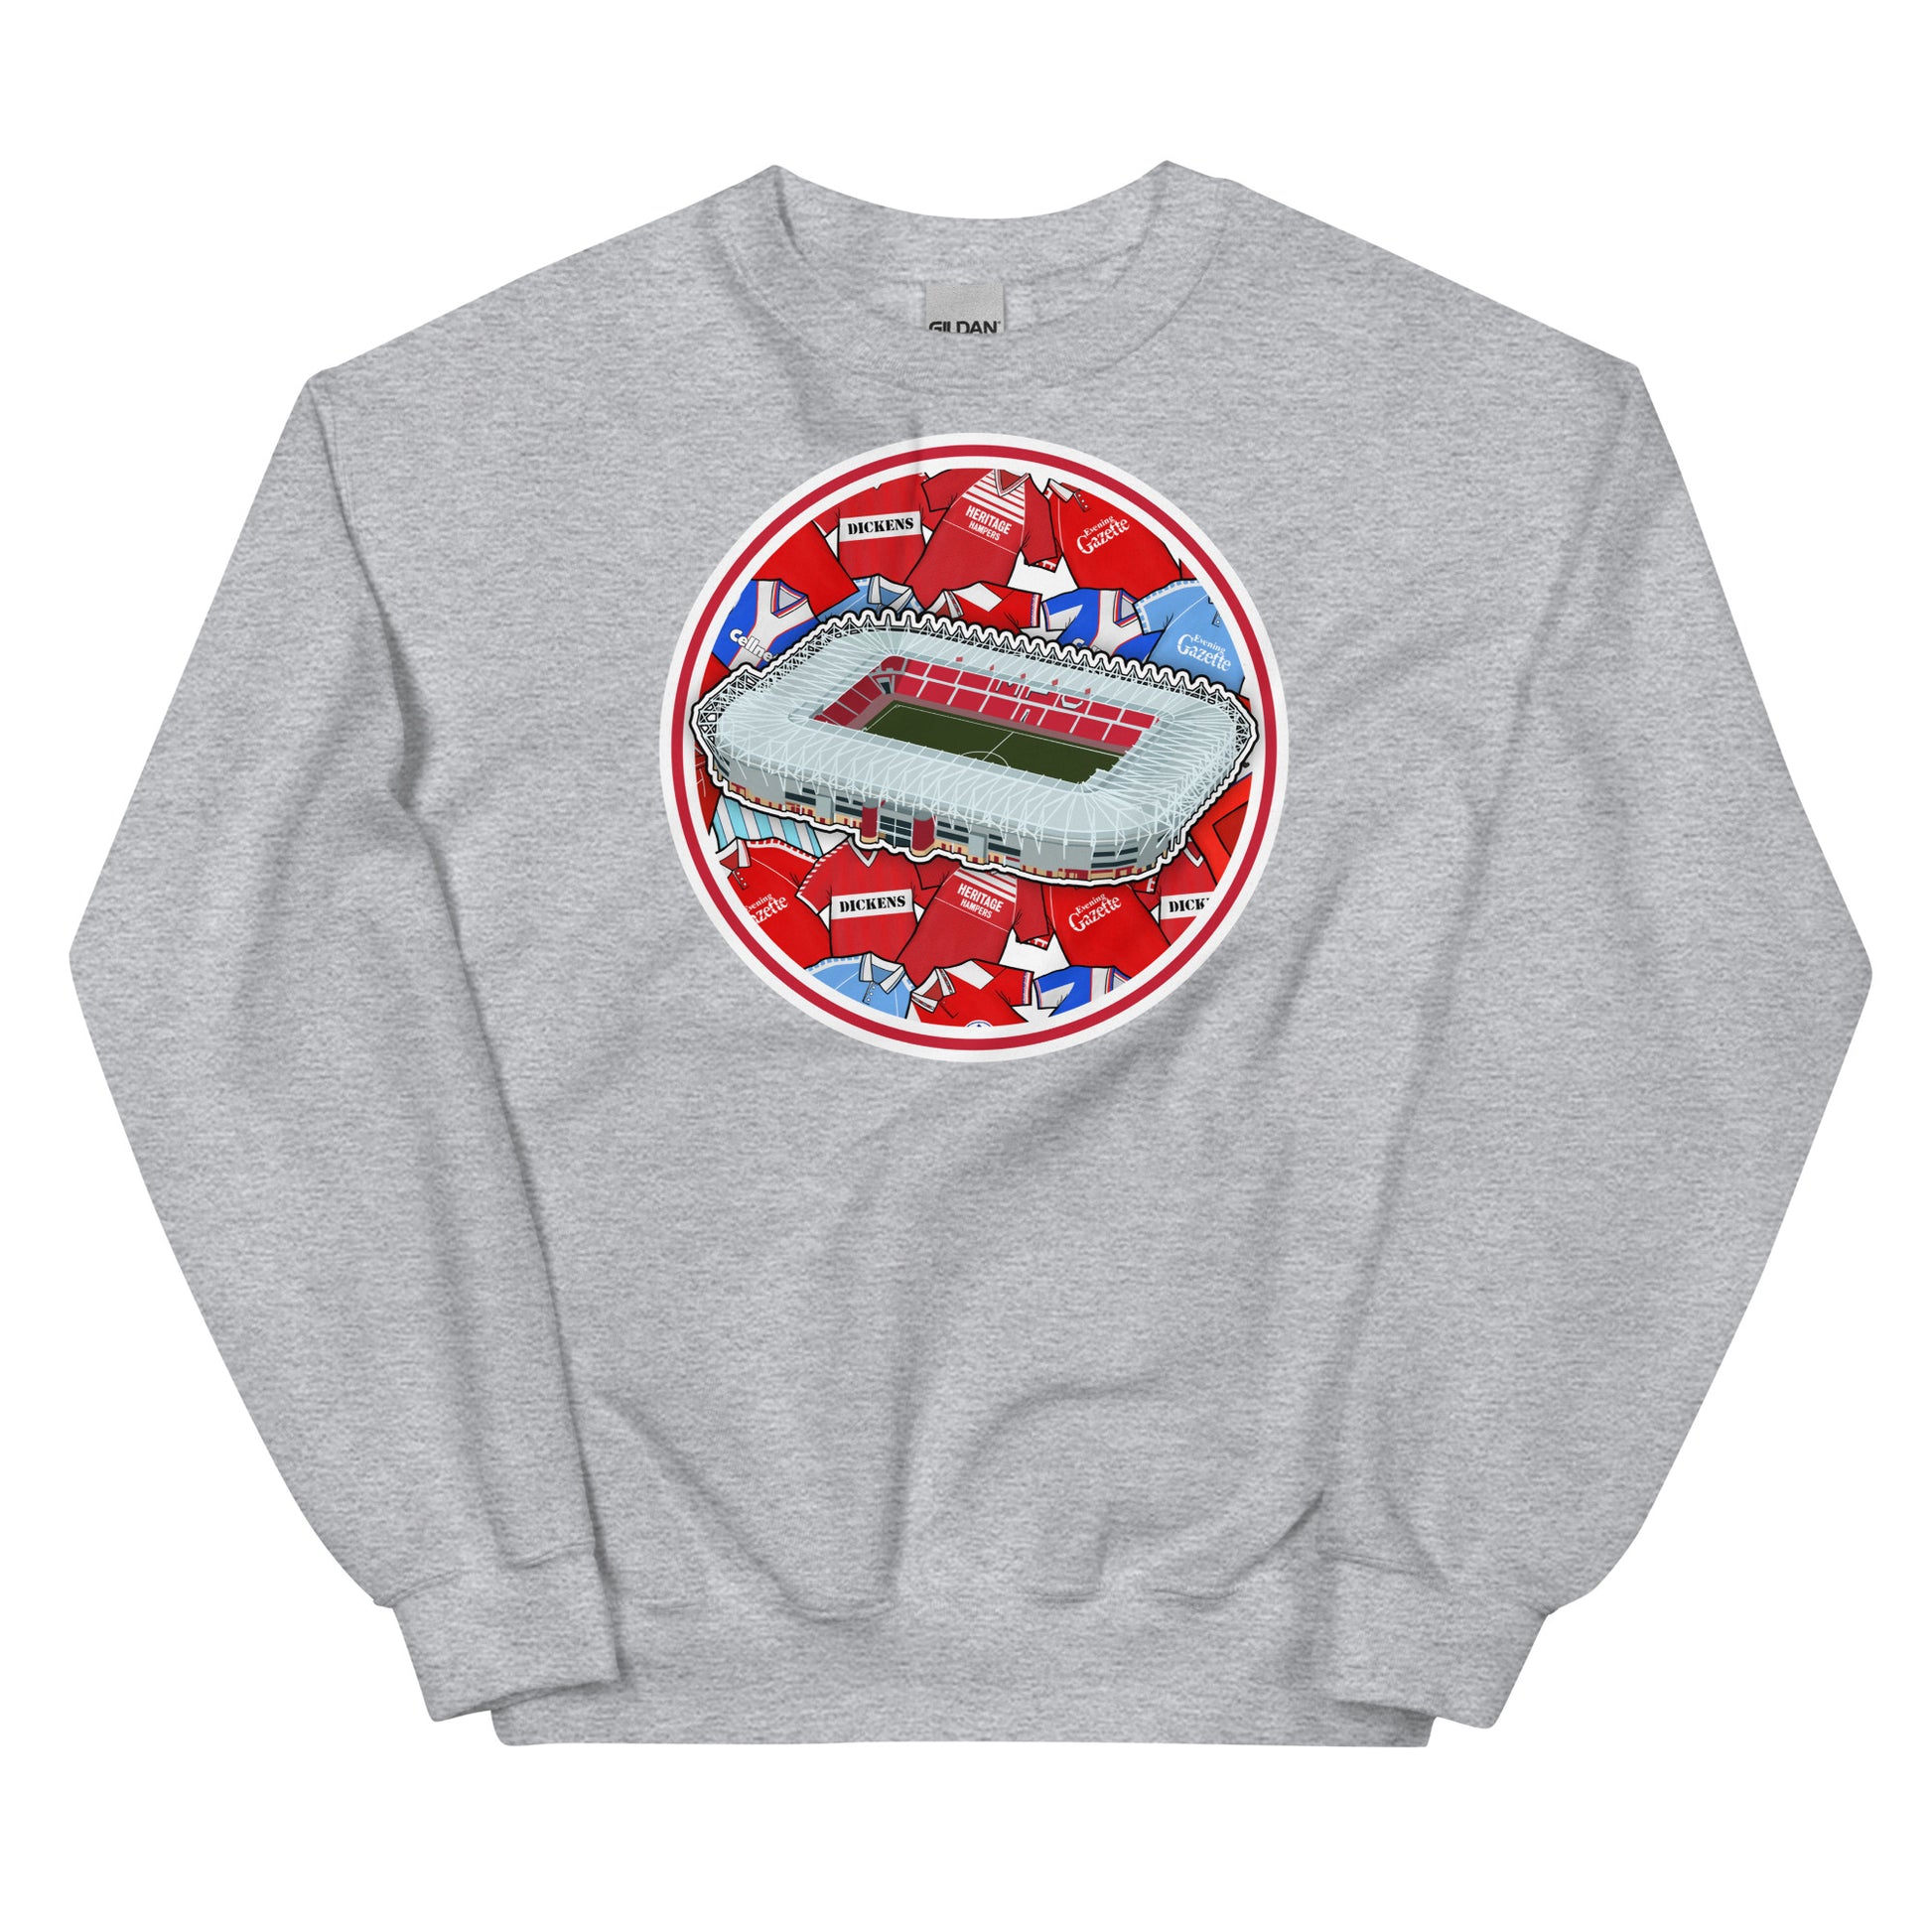 Grey Retro Sweatshirt Inspired by the home of Middlesbrough Football, The Riverside Stadium in North Yorkshire!